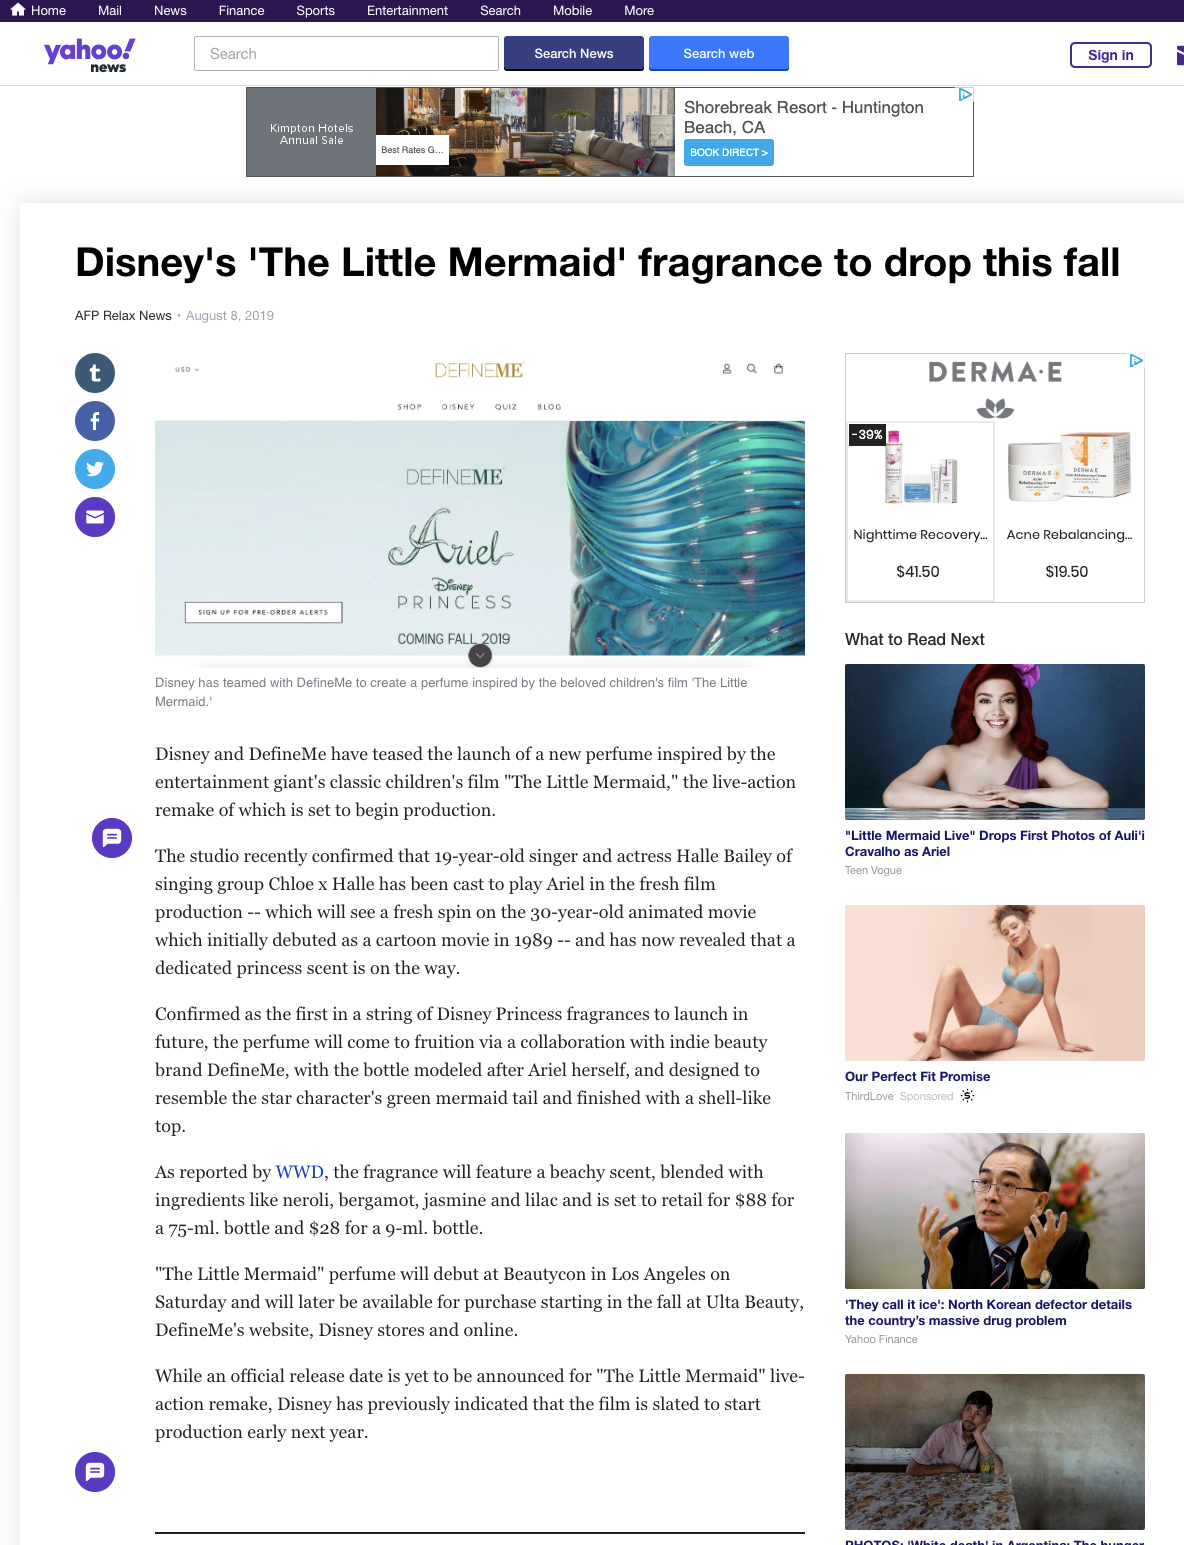 Disney's 'The Little Mermaid' fragrance to drop this fall